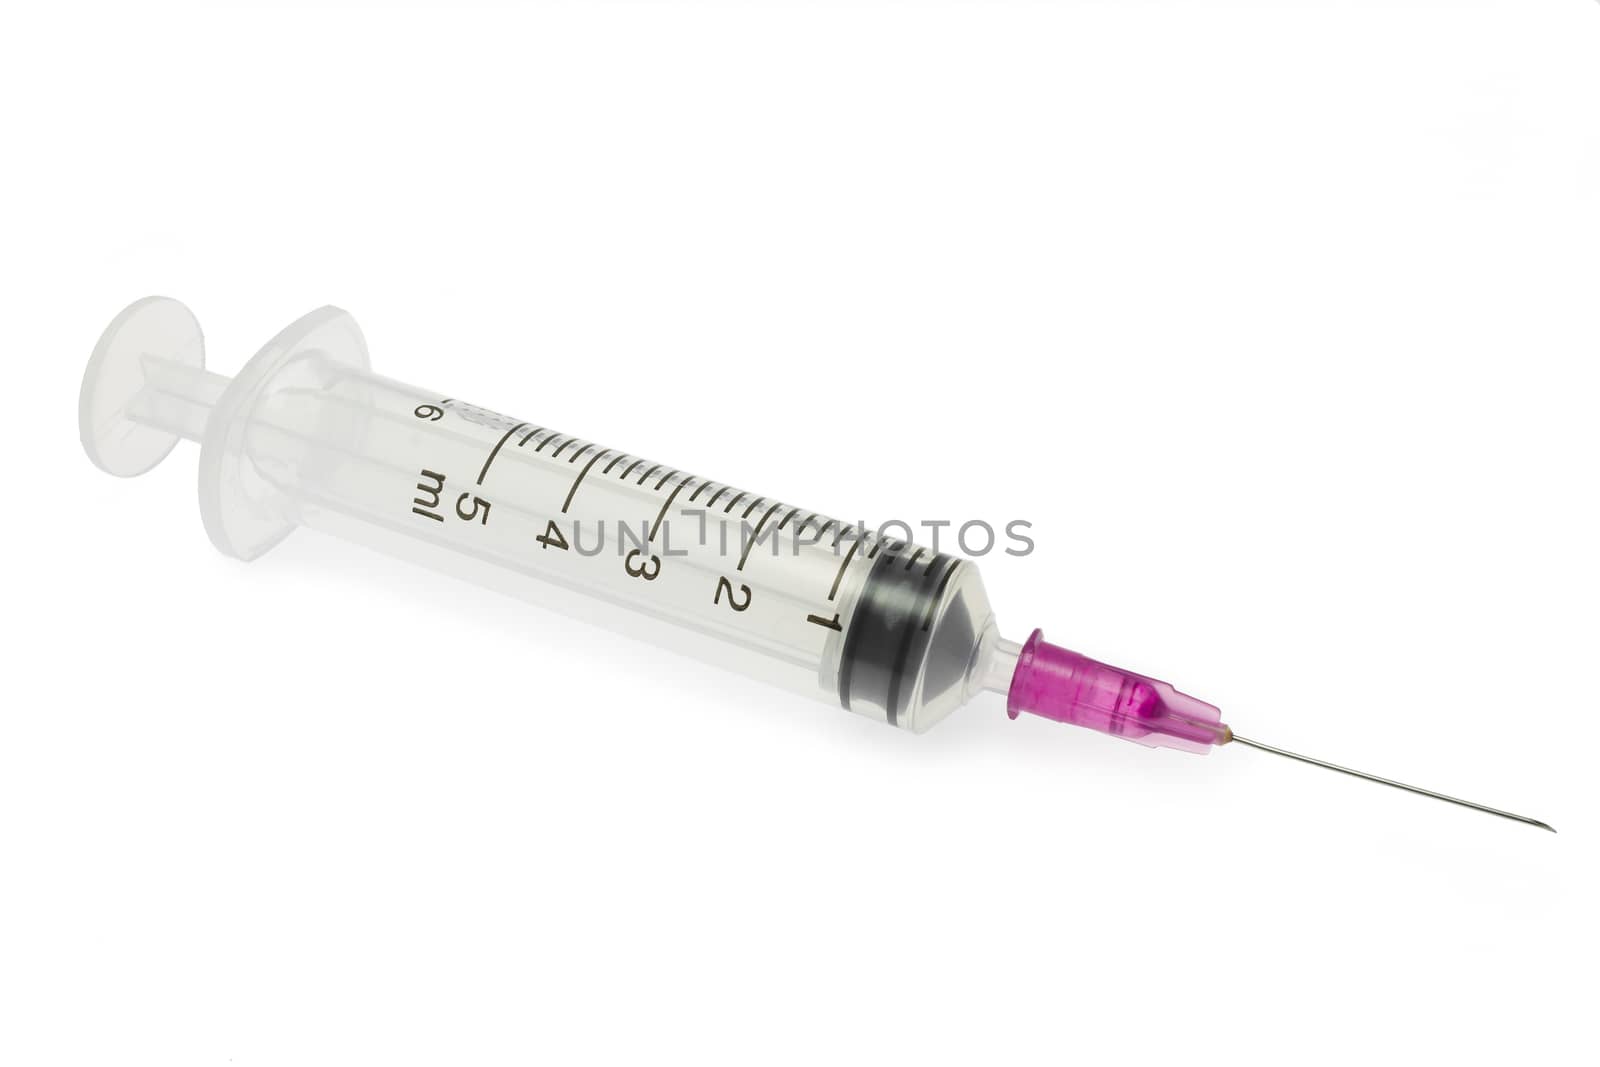 Plastic syringe on white background and soft light. Medical device in hospital for injection.